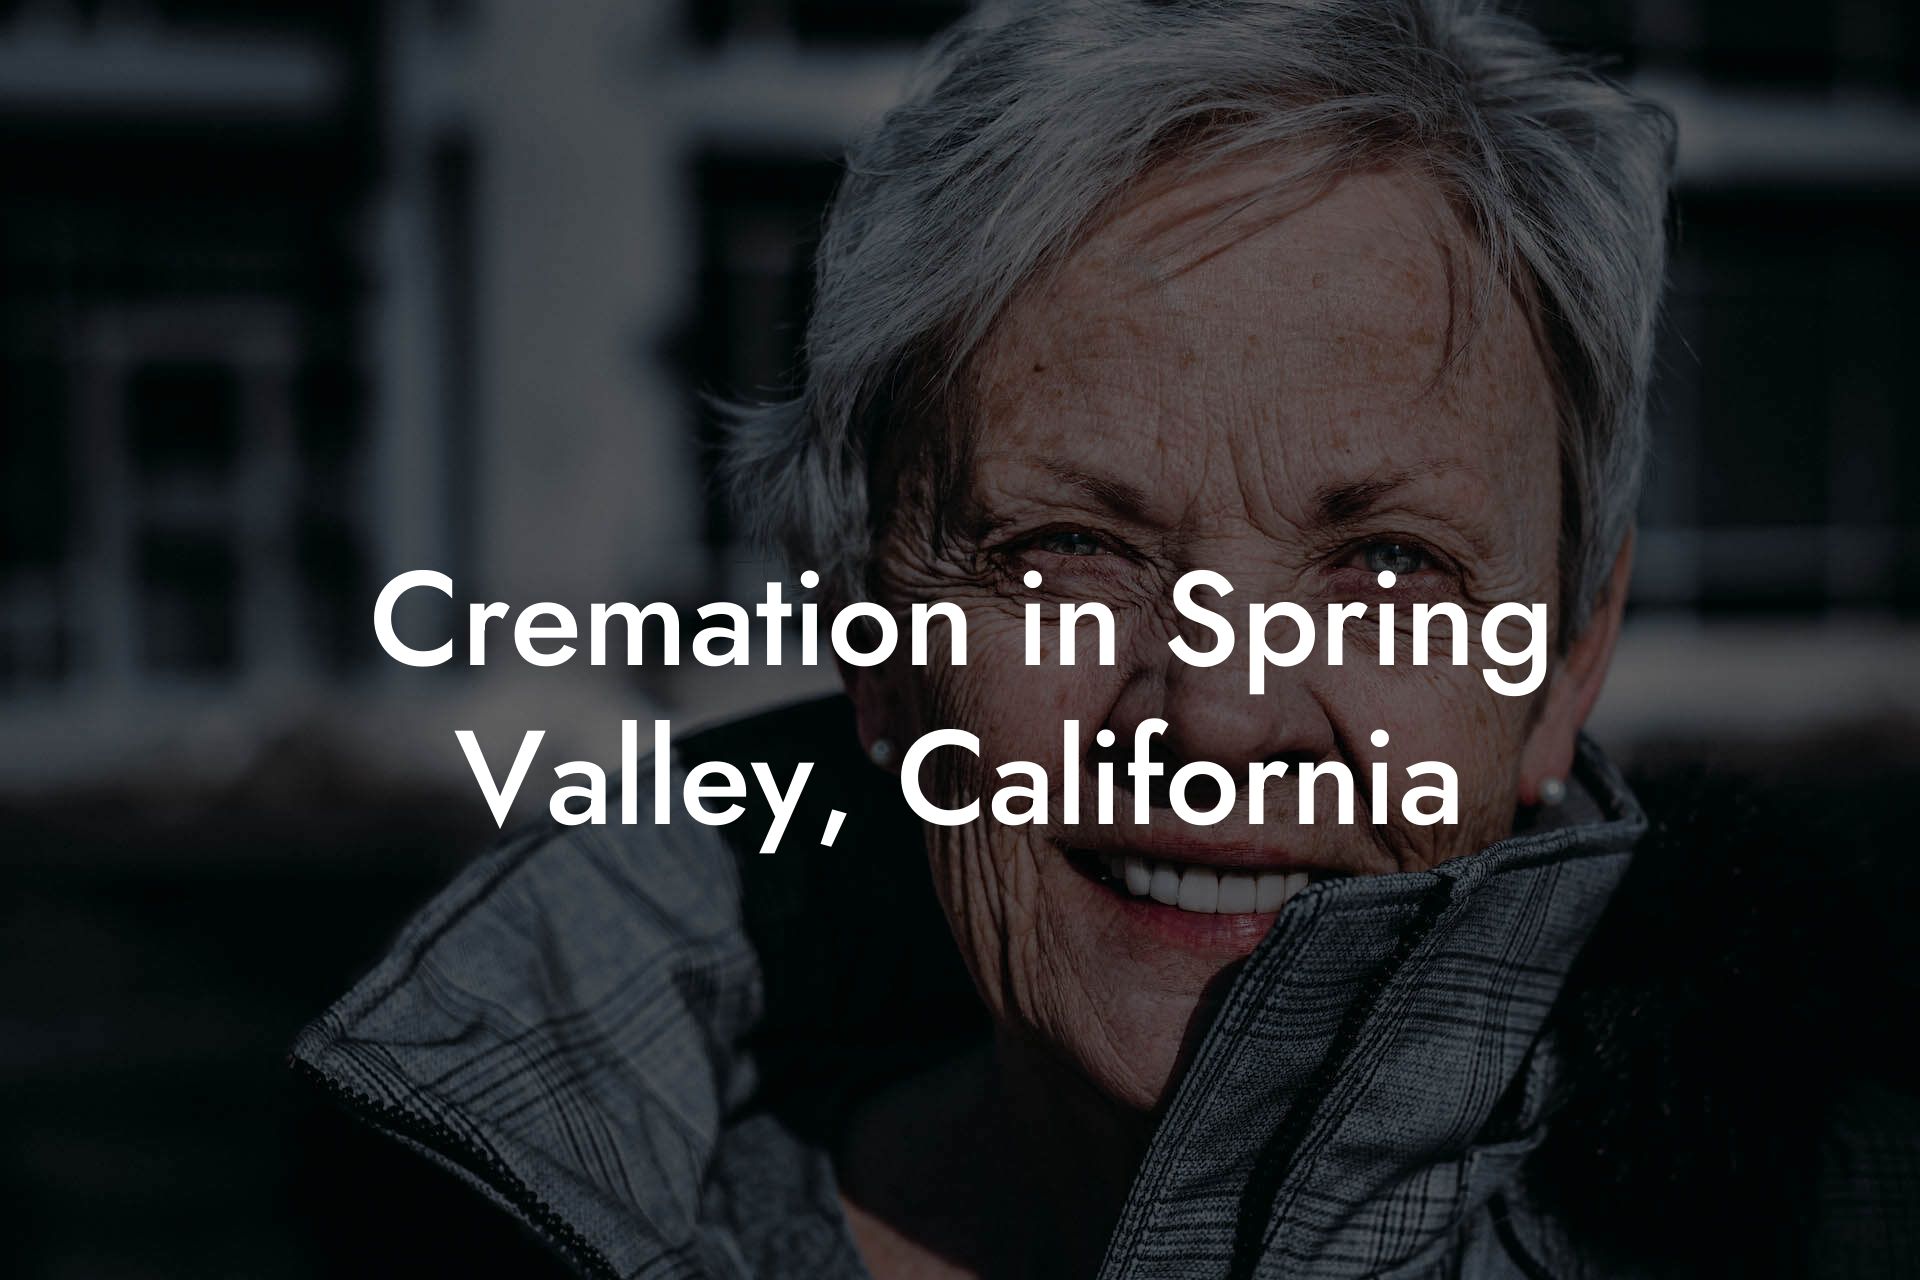 Cremation in Spring Valley, California